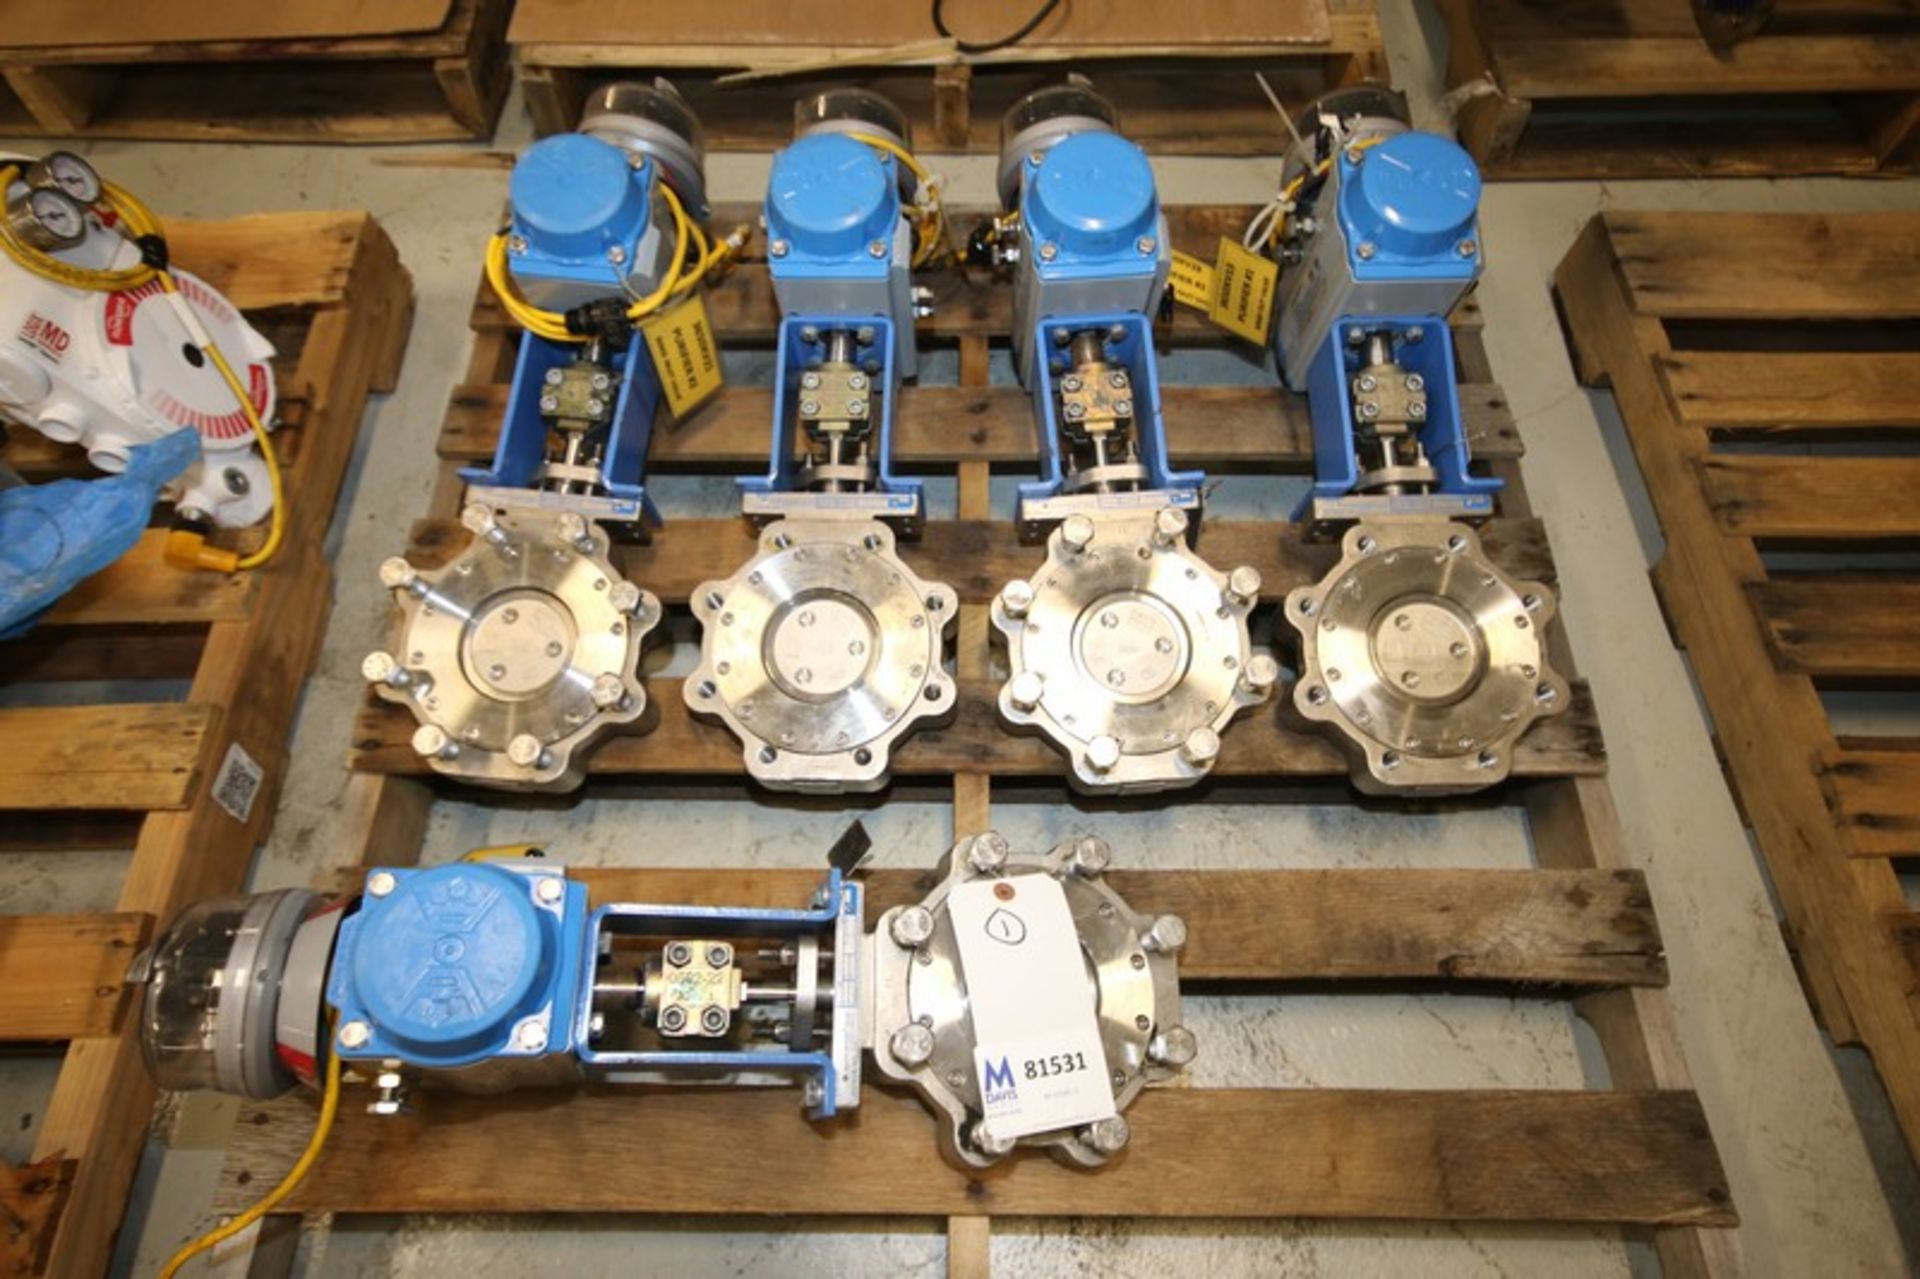 Lot of (5) Jamesbury 4" S/S Pneumatic Butterfly bValves, Flanged Type (INV#81531)(Located @ the